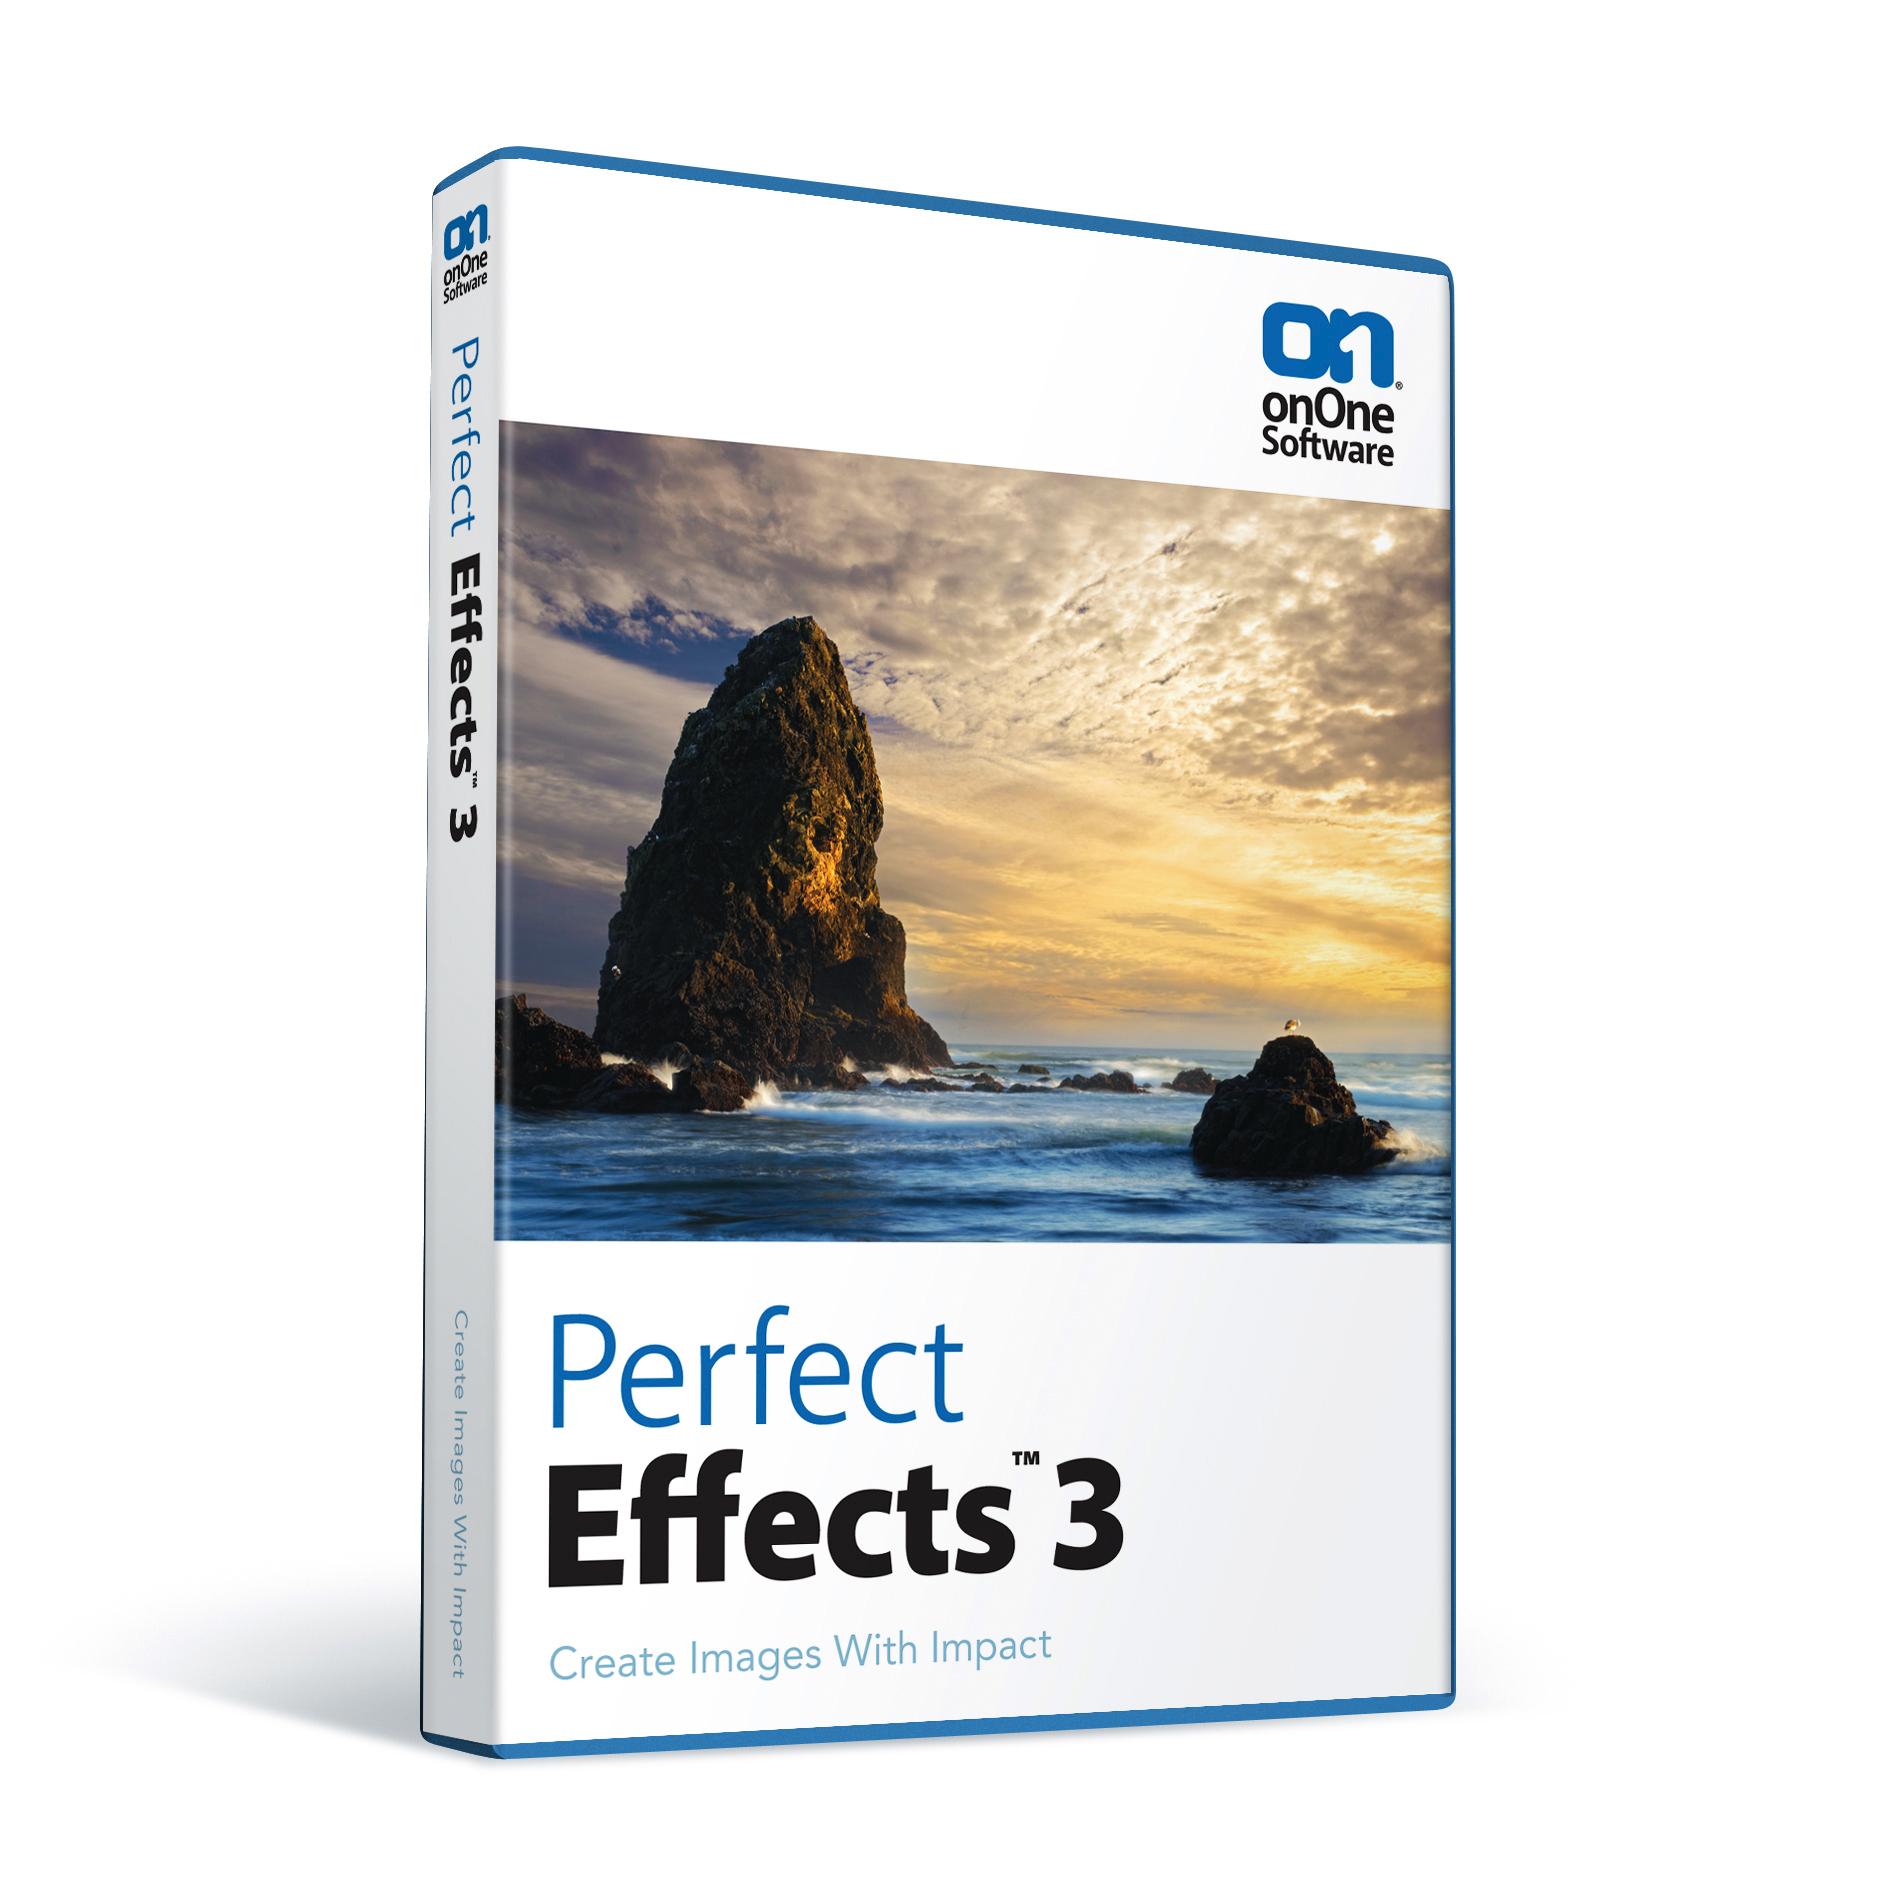 Perfect Effects 3